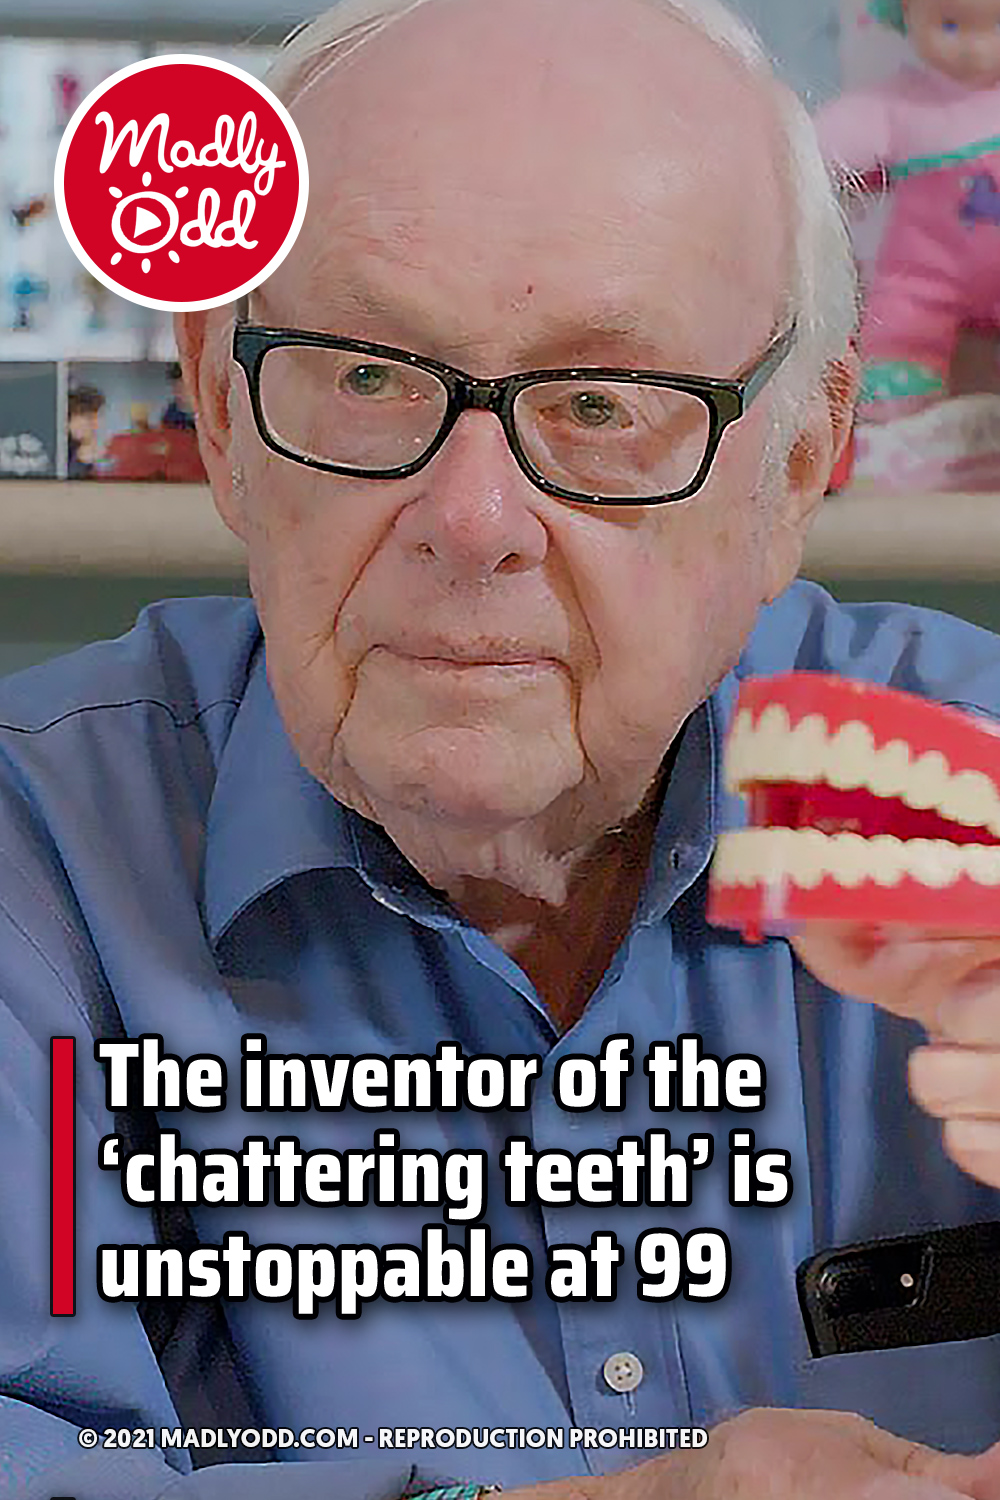 The inventor of the ‘chattering teeth’ is unstoppable at 99